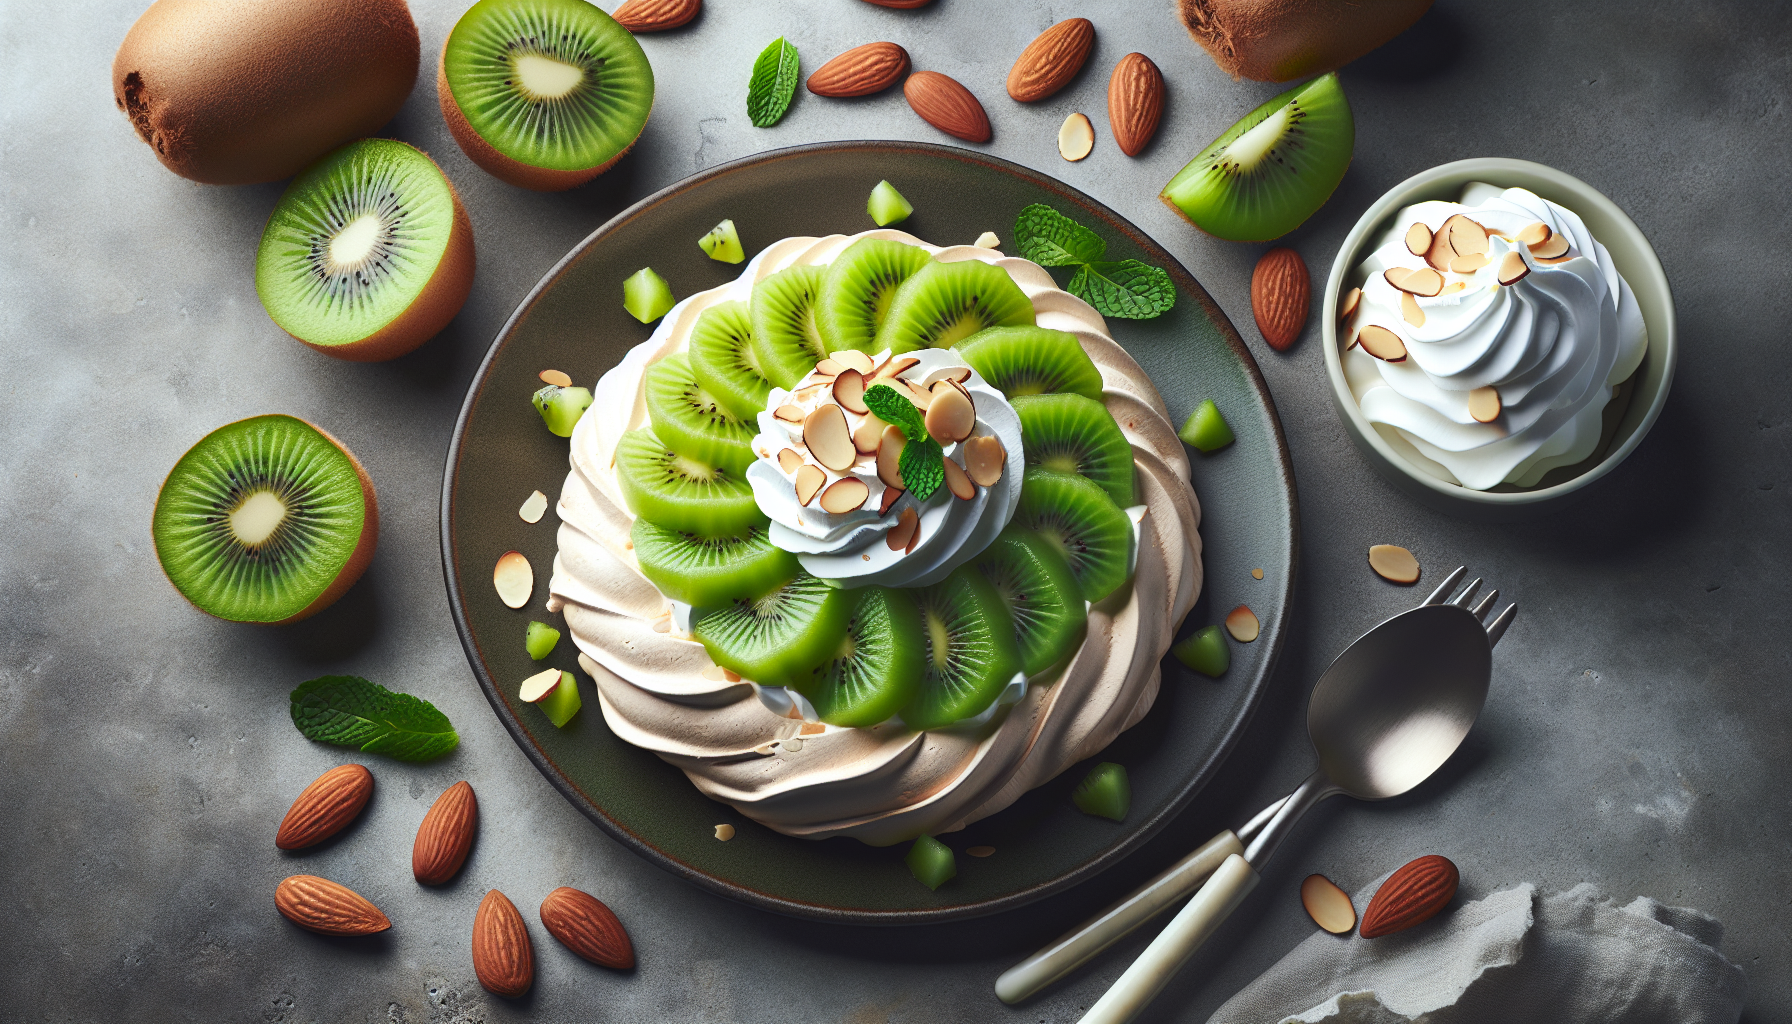 Share Your Healthy New Zealand-inspired Dessert Recipe.